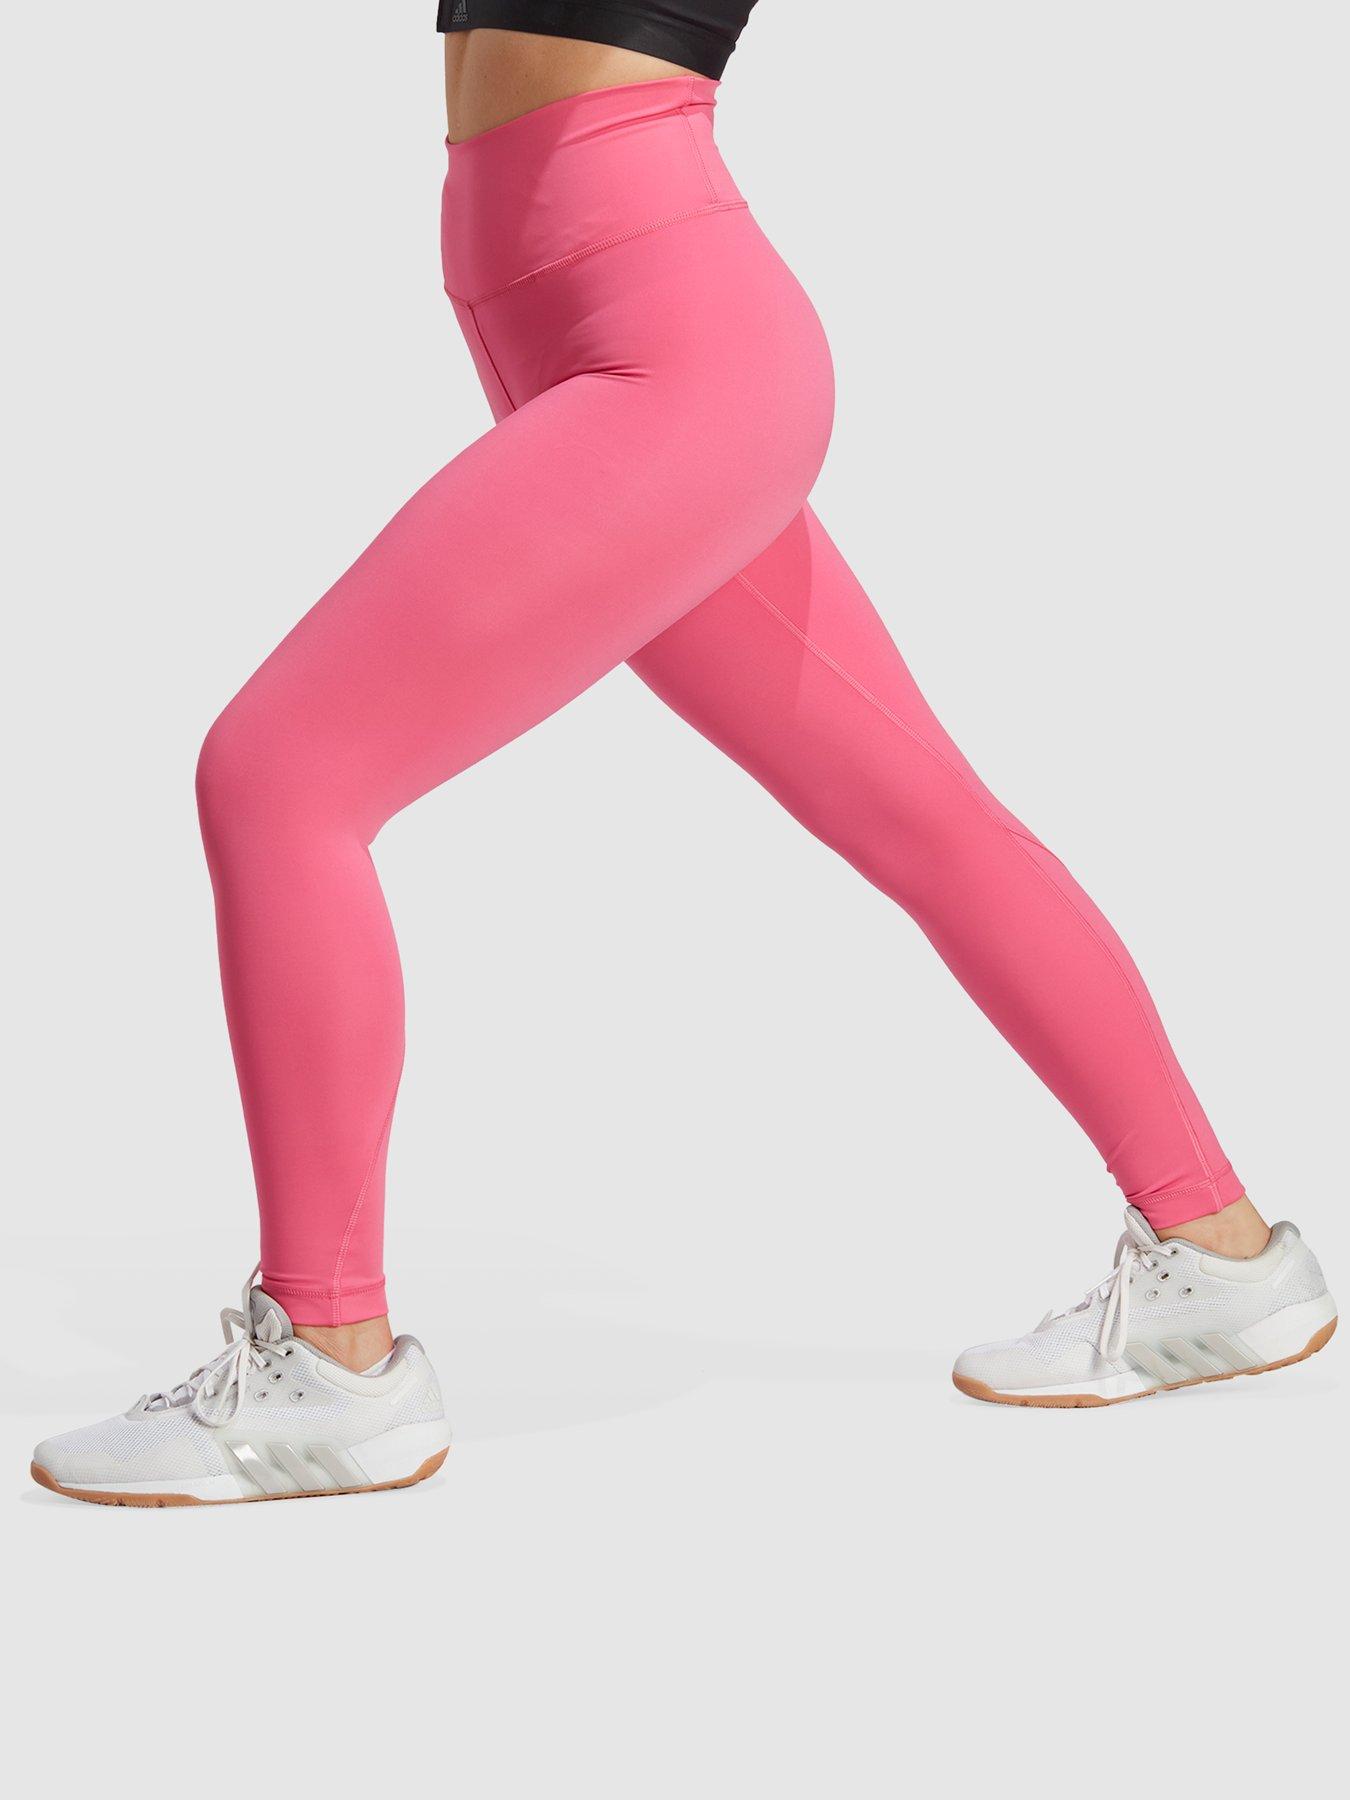 Infinity Curves - The New Fitness Anti Cellulite Texture Leggings